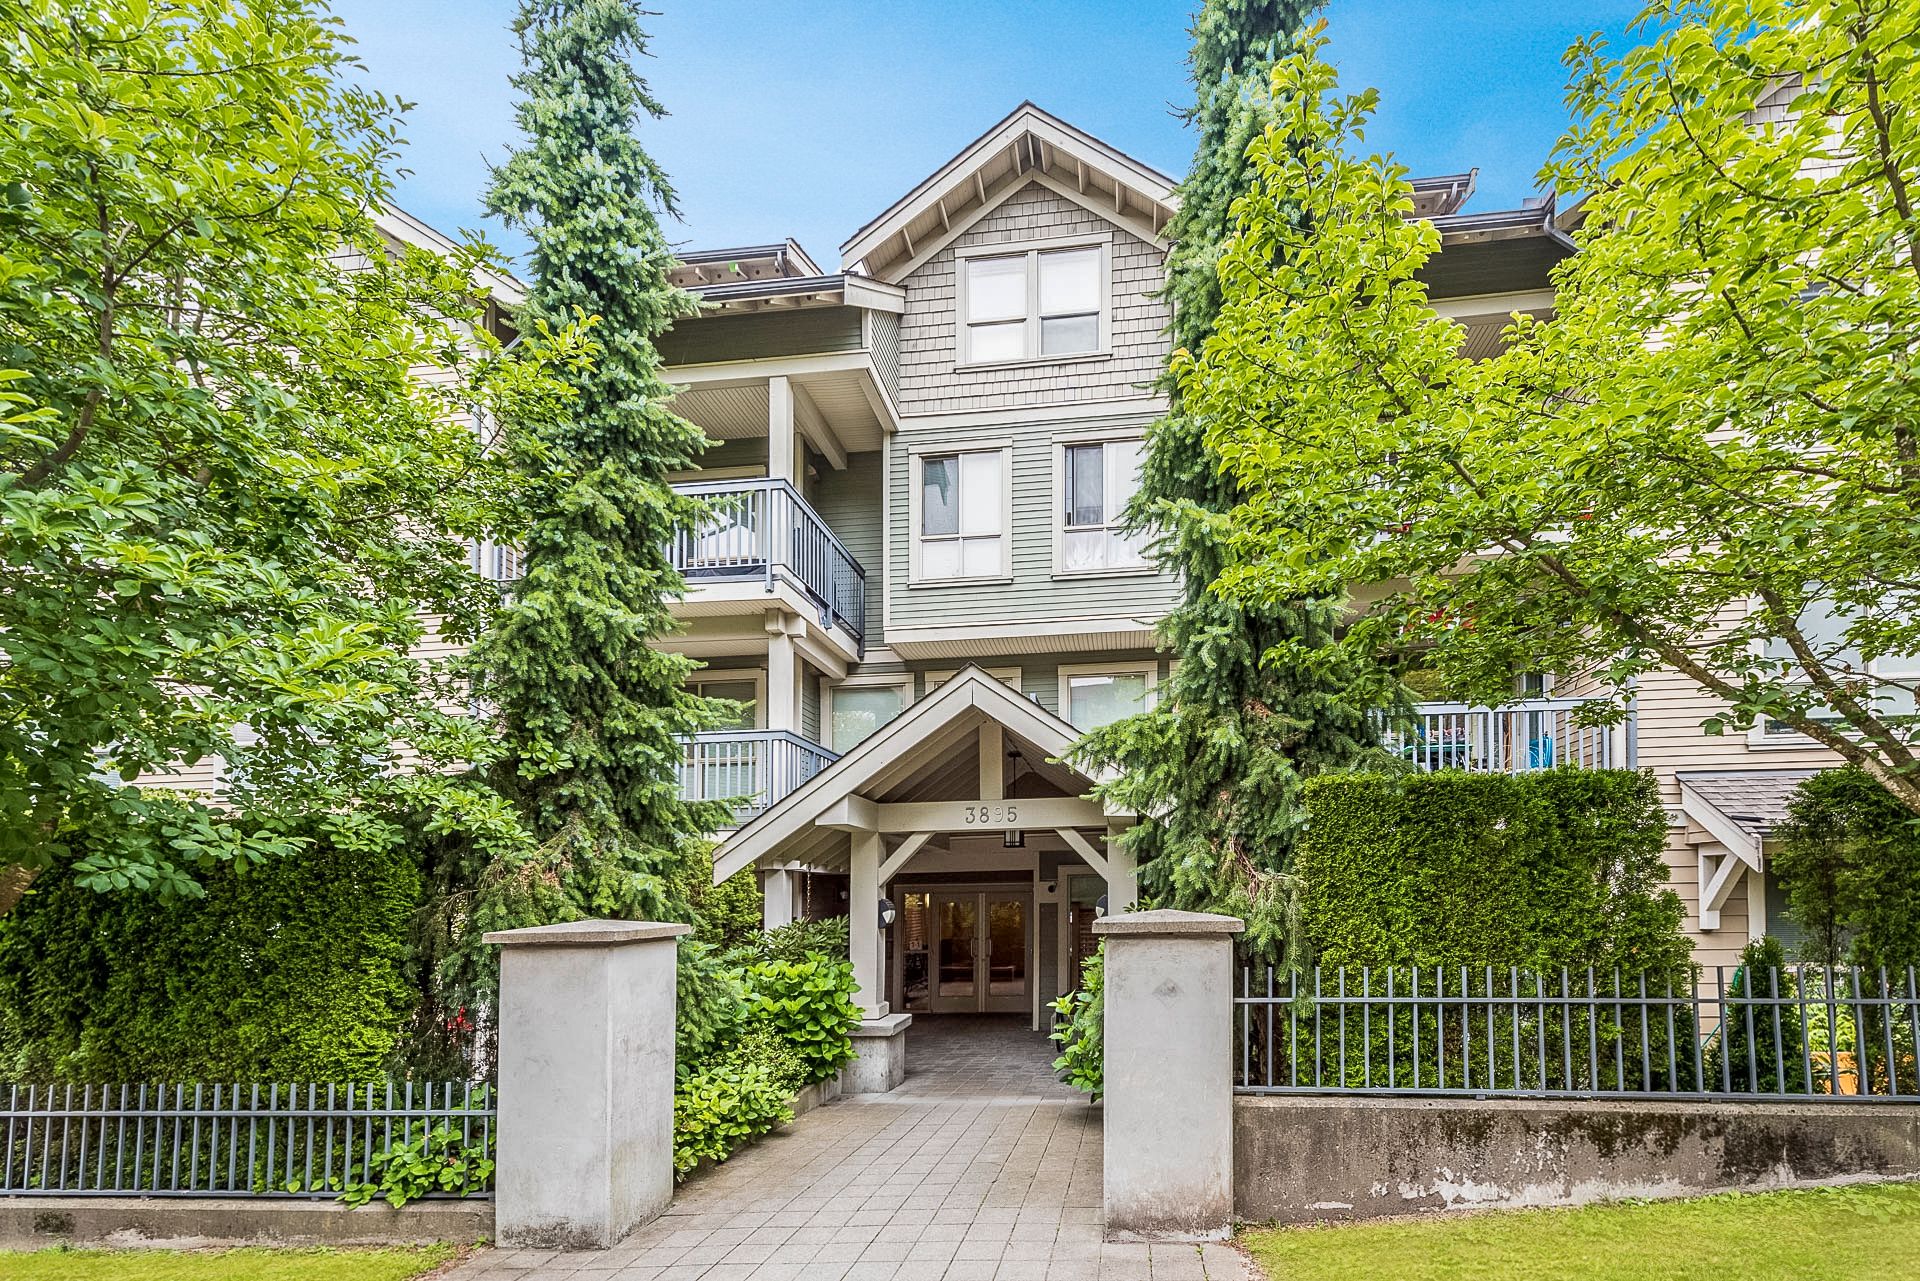 Main Photo: 308 3895 SANDELL Street in Burnaby: Central Park BS Condo for sale in "Clarke House Central Park" (Burnaby South)  : MLS®# R2287326